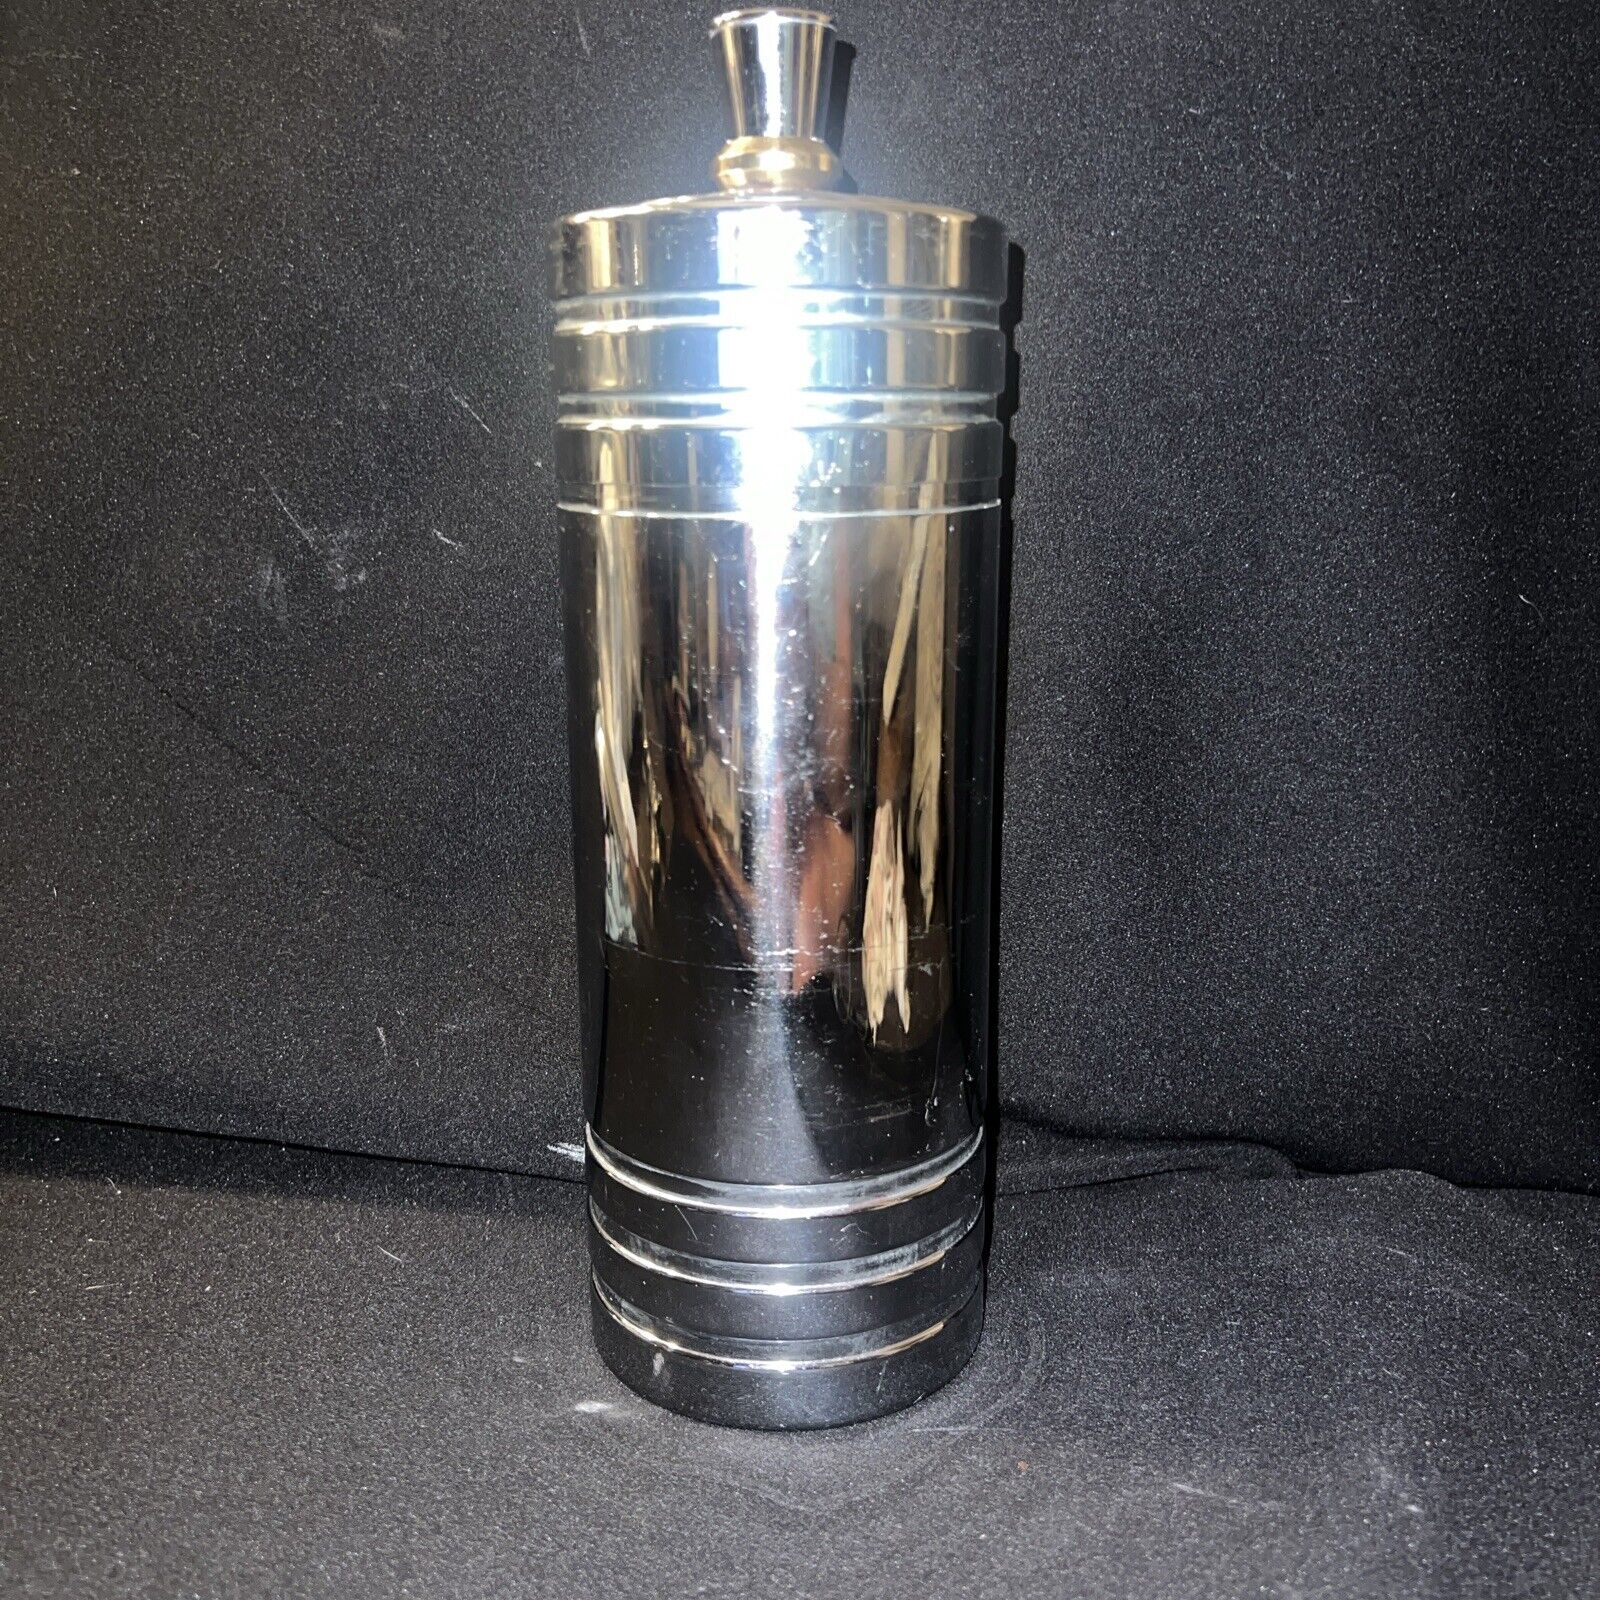 Chase Gaiety Cocktail Shaker